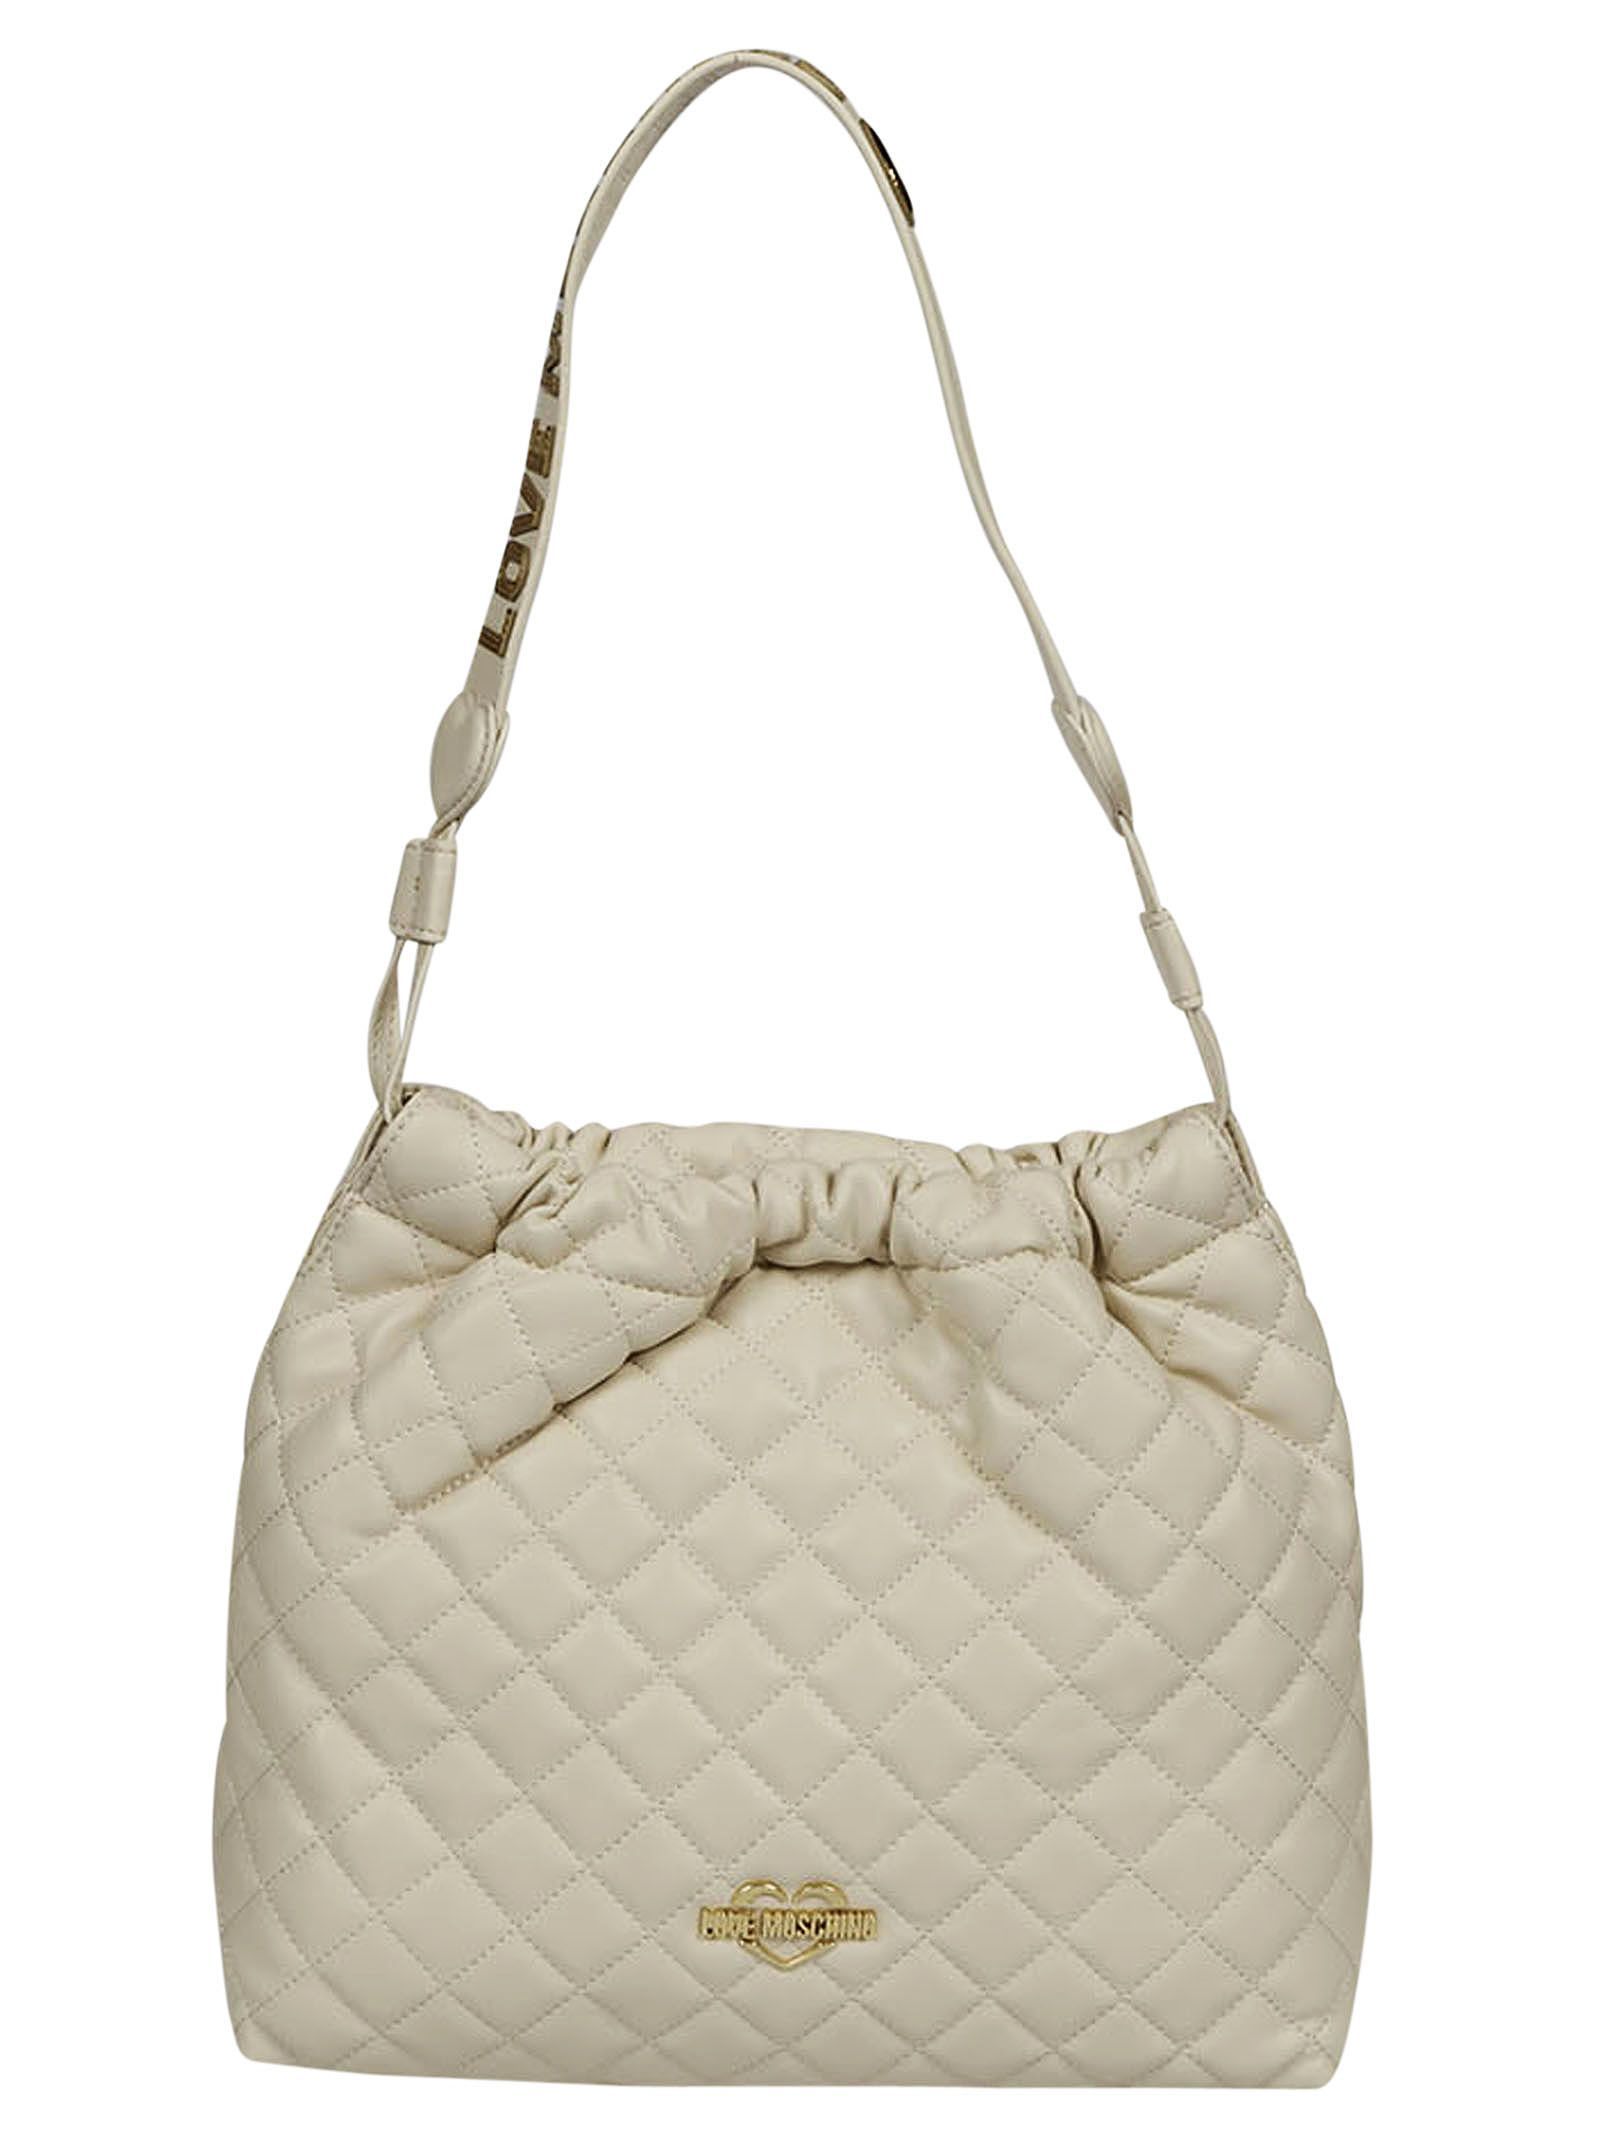 Love Moschino Quilted Bucket Bag | Italist.com US